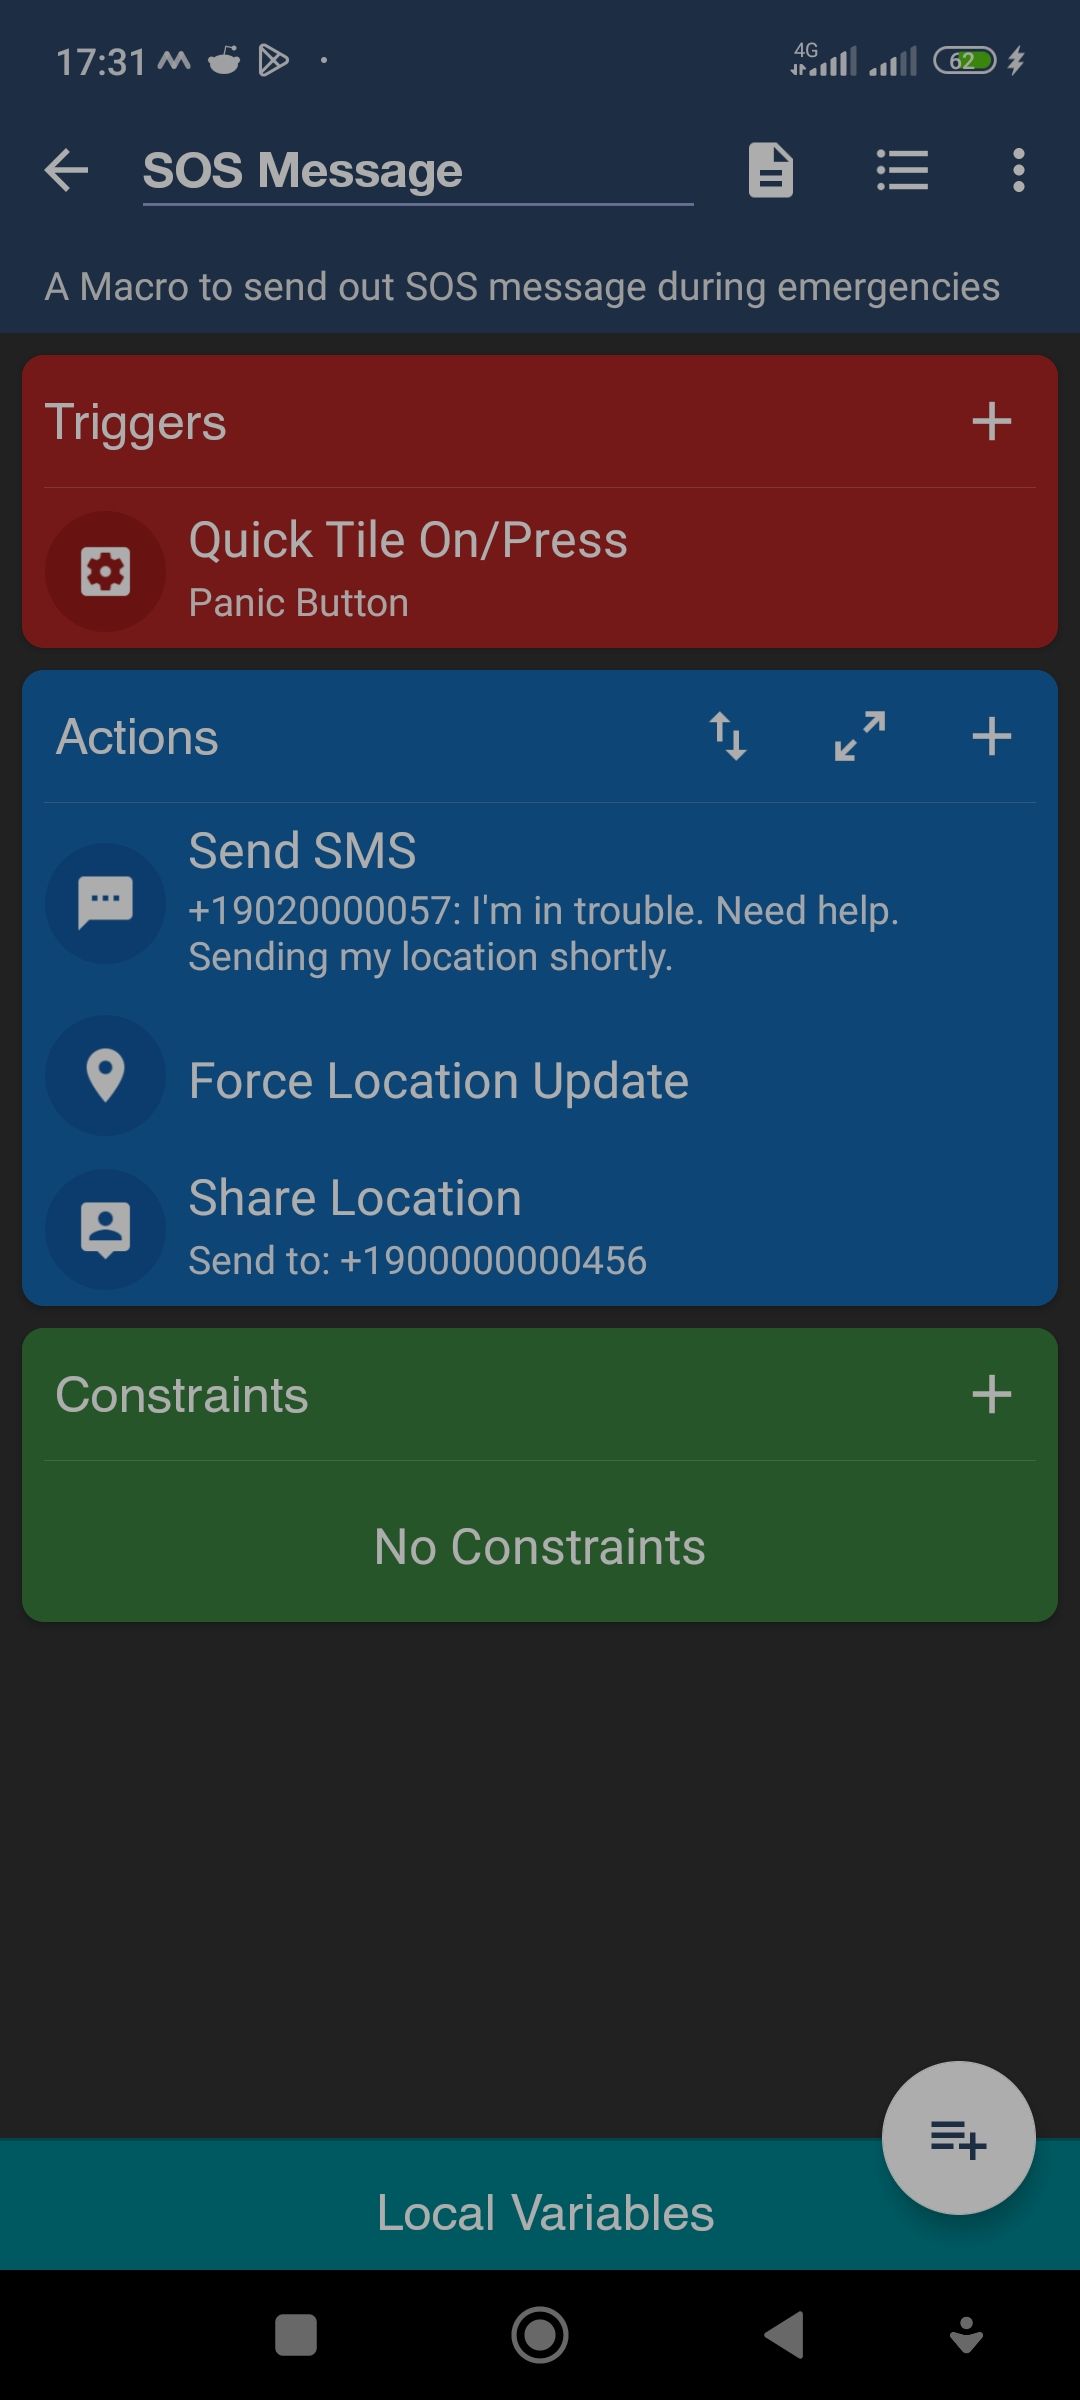 Configured Macro for sharing location via SMS